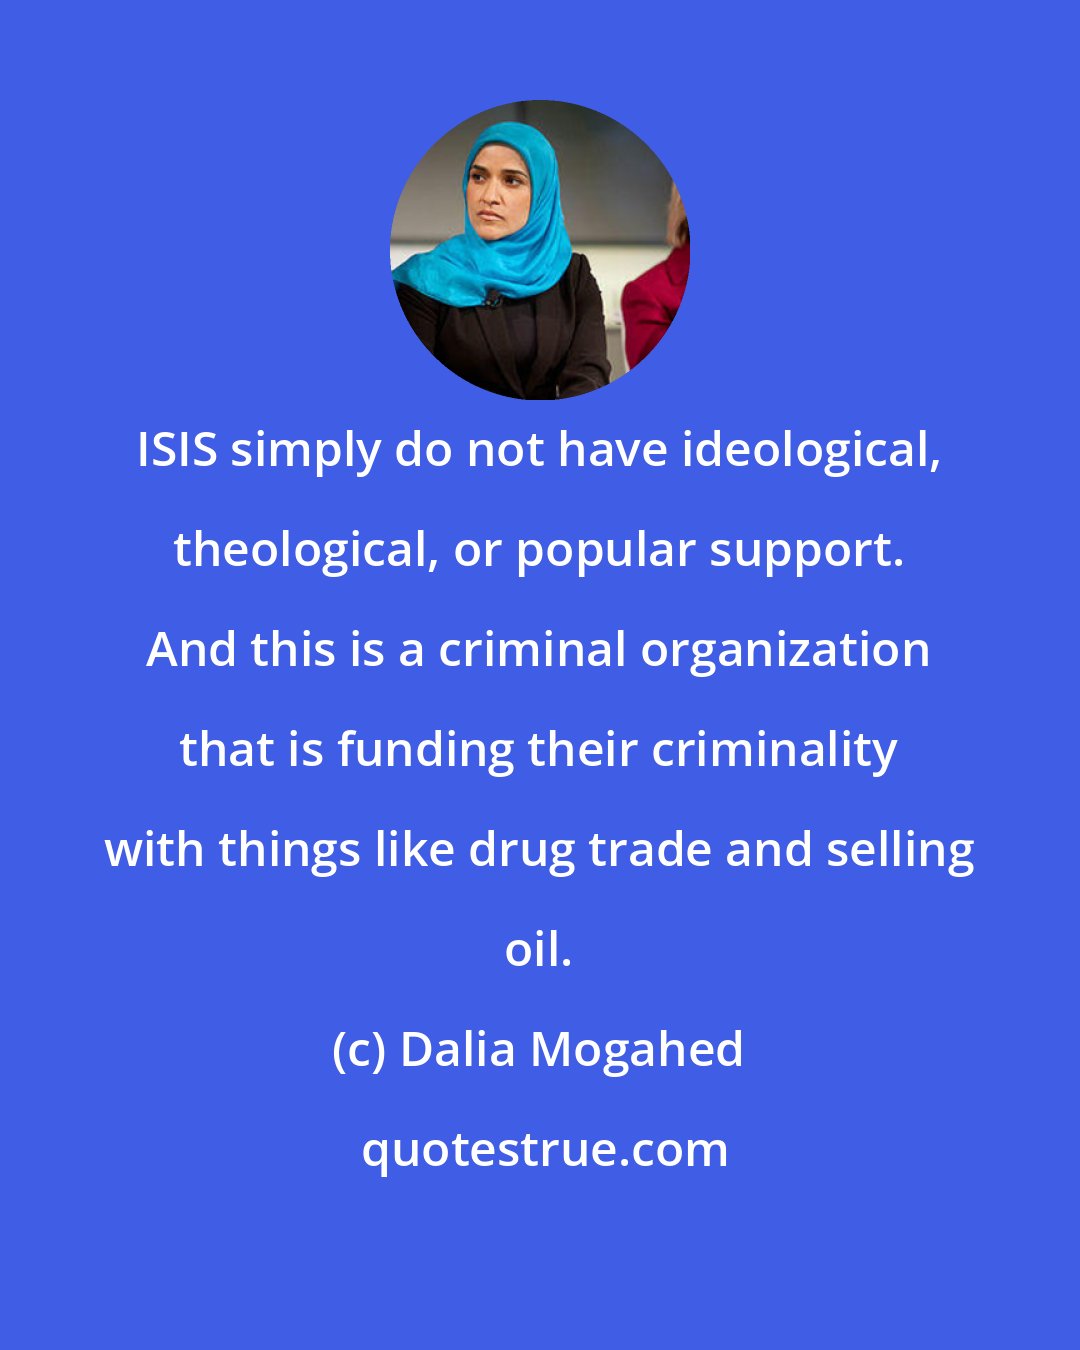 Dalia Mogahed: ISIS simply do not have ideological, theological, or popular support. And this is a criminal organization that is funding their criminality with things like drug trade and selling oil.